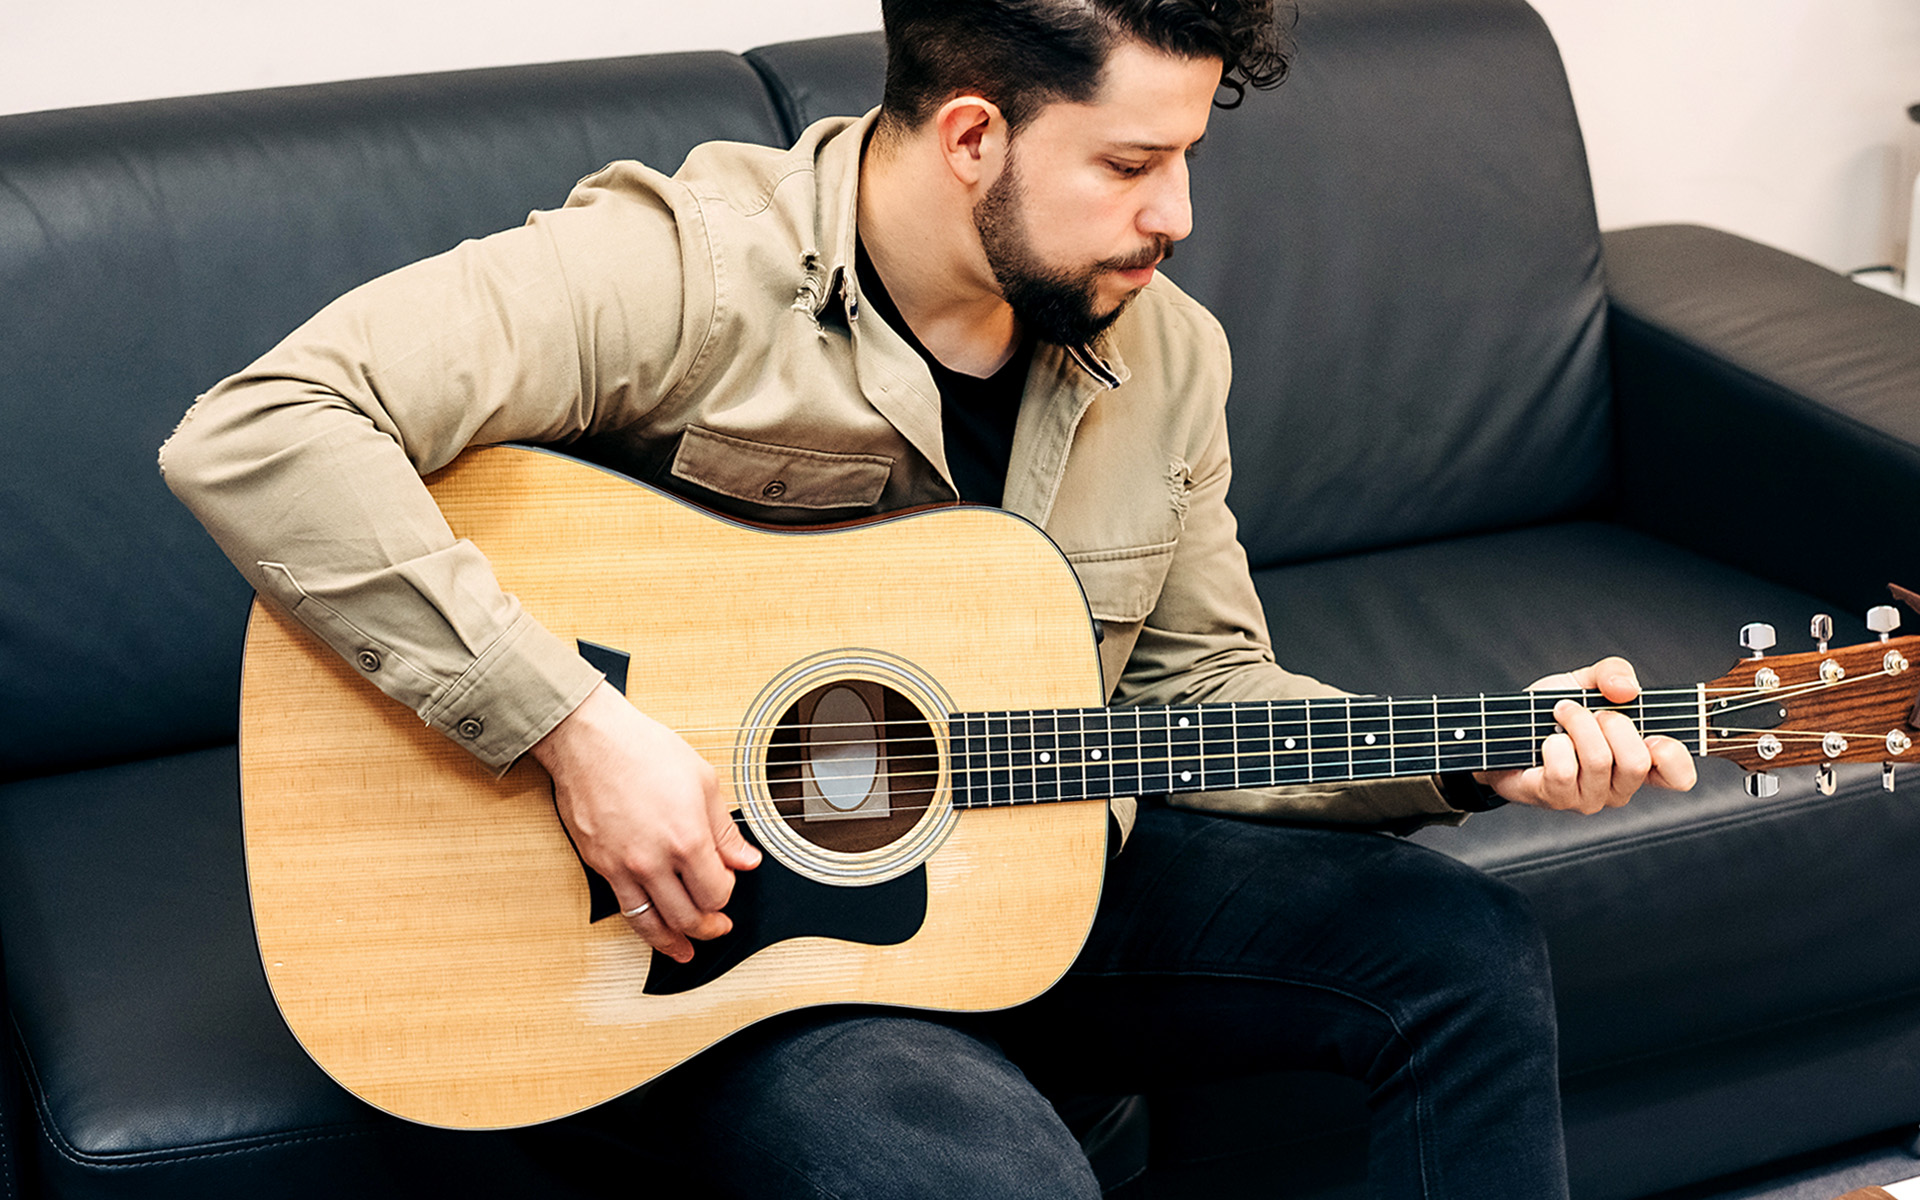 A man plays common chord progression on an acoustic guitar.